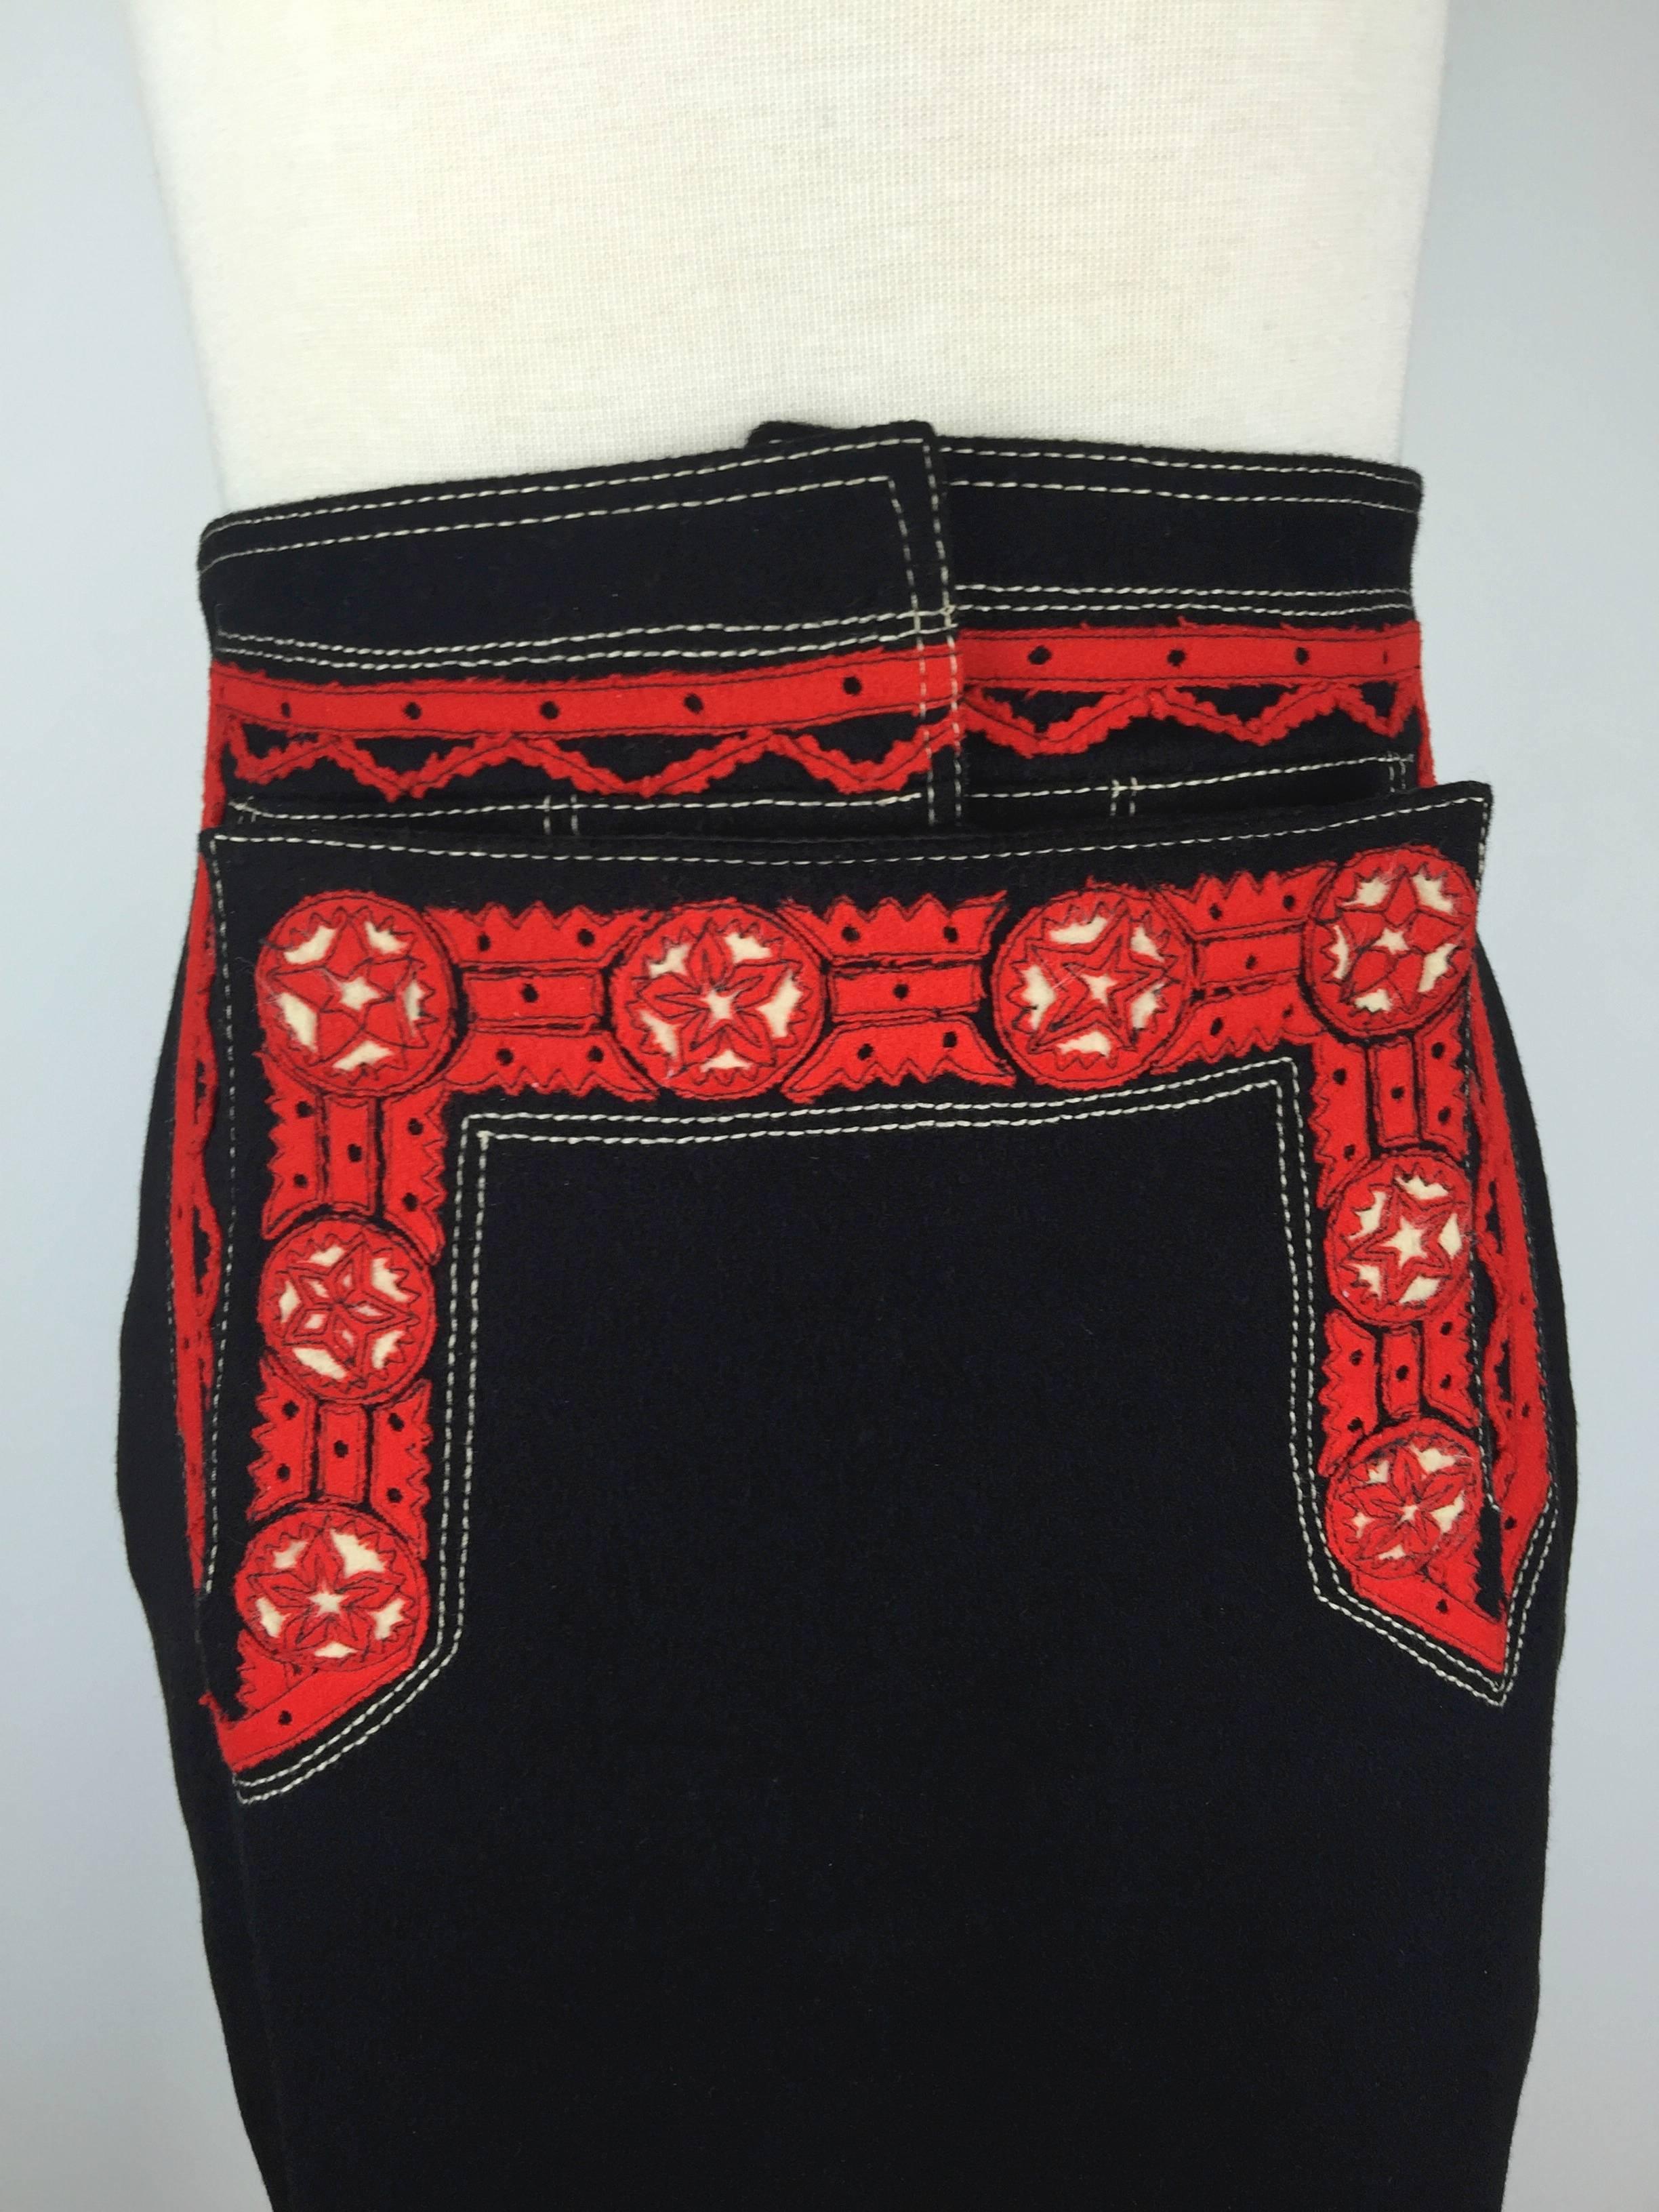 
Fabulous black felted wool skirt with red and white folkloric decoration
and lederhosen style fastenings with lots of horn buttons.

It laces at the back with a nod to Gaultier's iconic corset designs.

The smooth black felted wool is